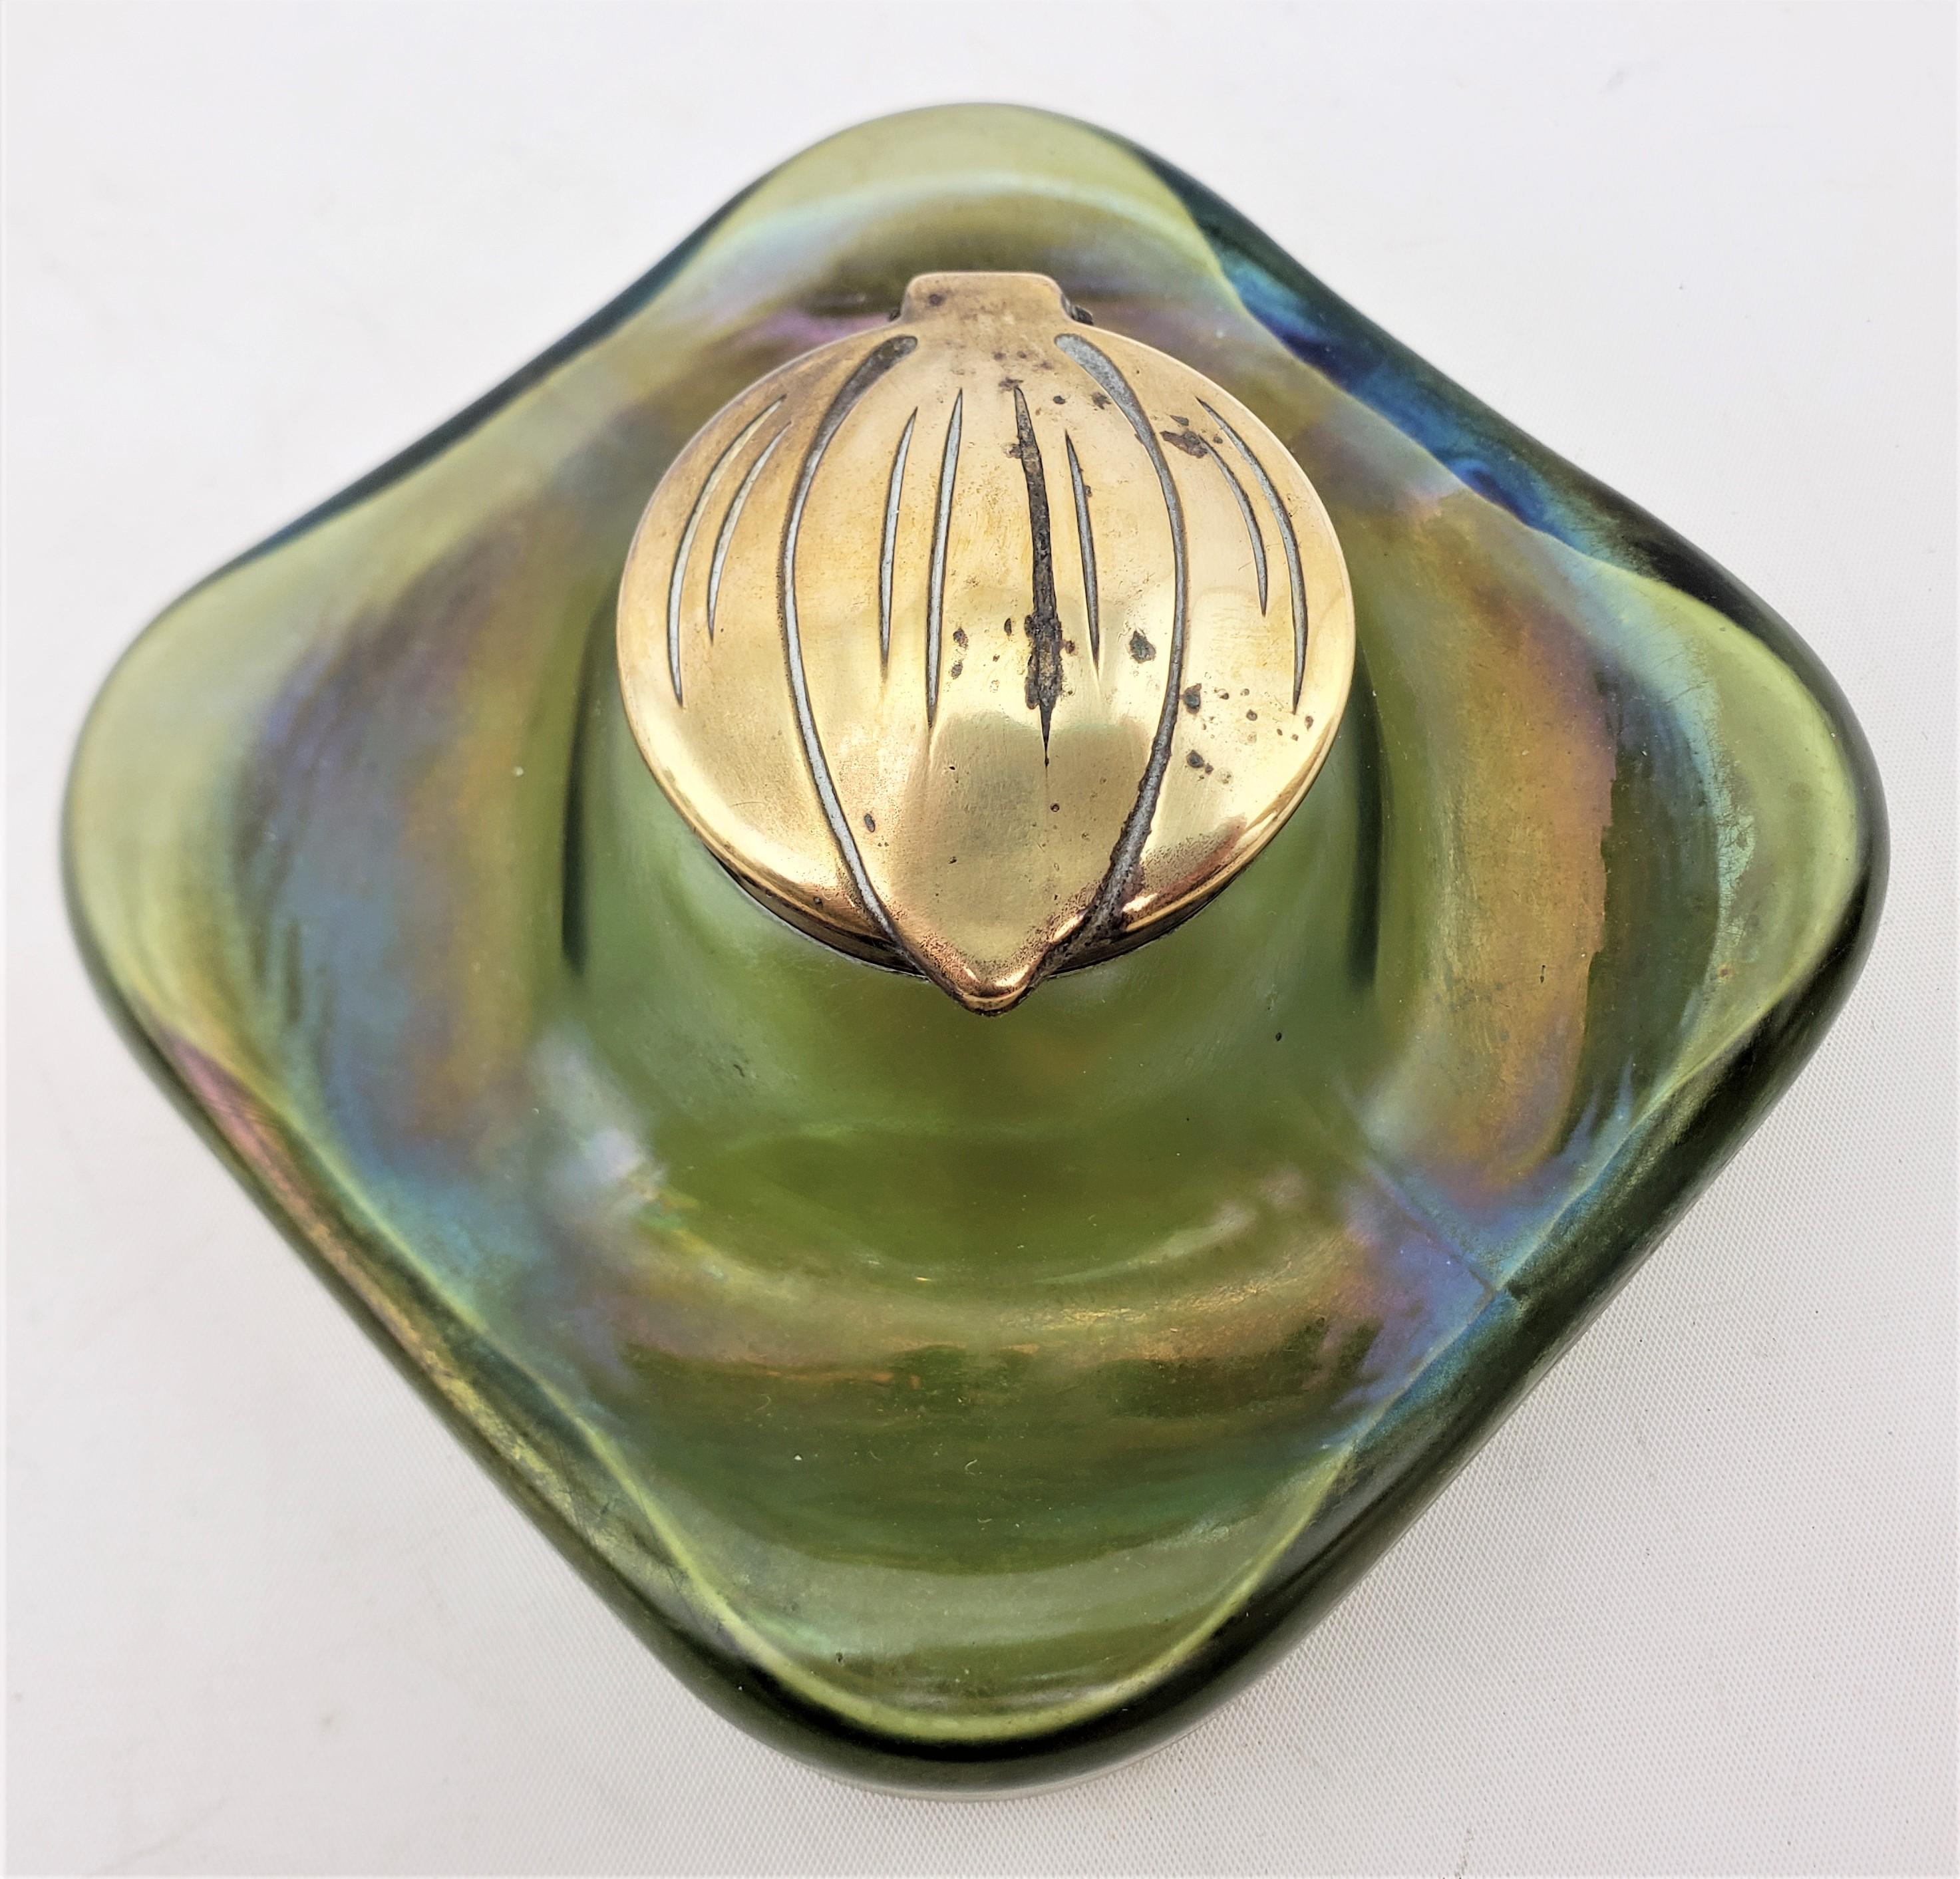 This antique art glass inkwell is unsigned, but presumed to have originated from Austria and date to approximately 1900 and done in the period Art Nouveau style. The body of the inkwell is done in a deep green glass with a strong iridescence and a